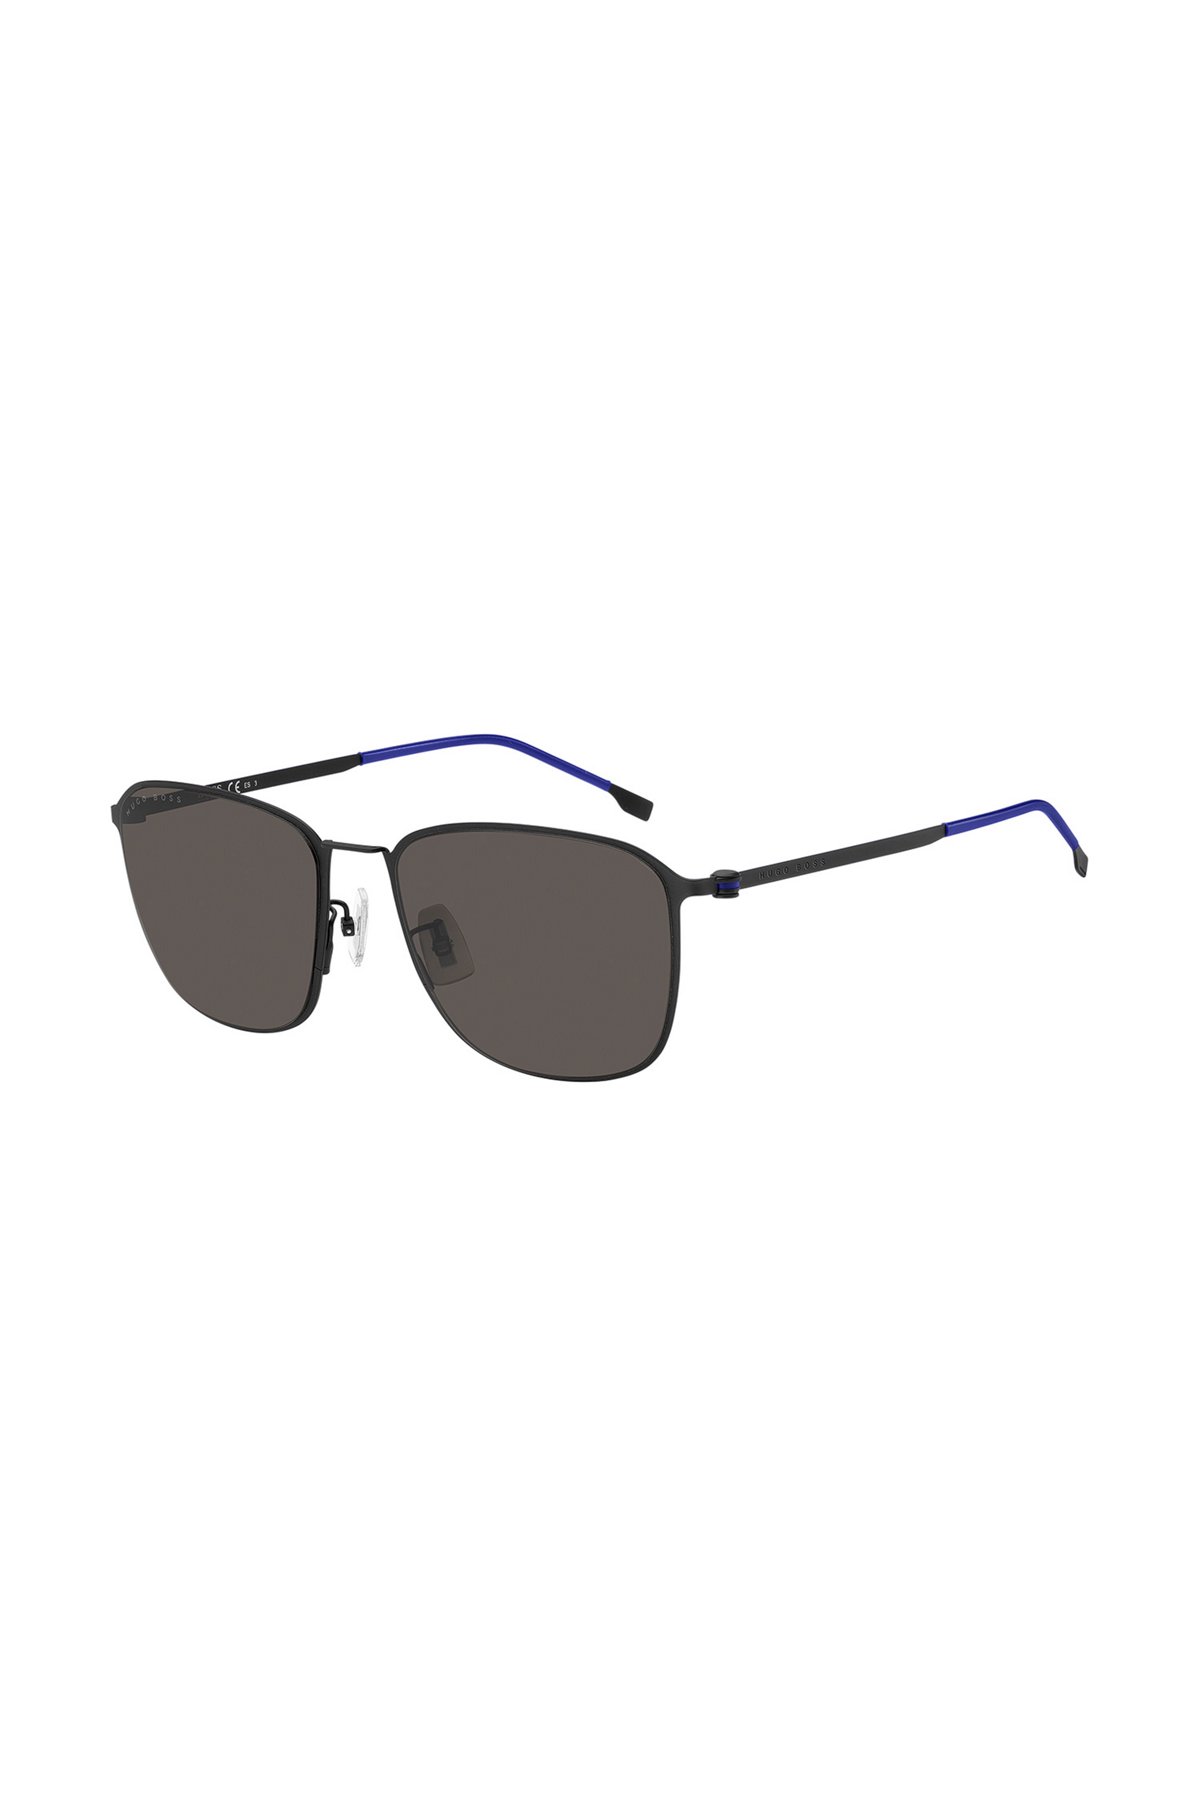 Black sunglasses in stainless steel with blue plastic sleeves, Assorted-Pre-Pack